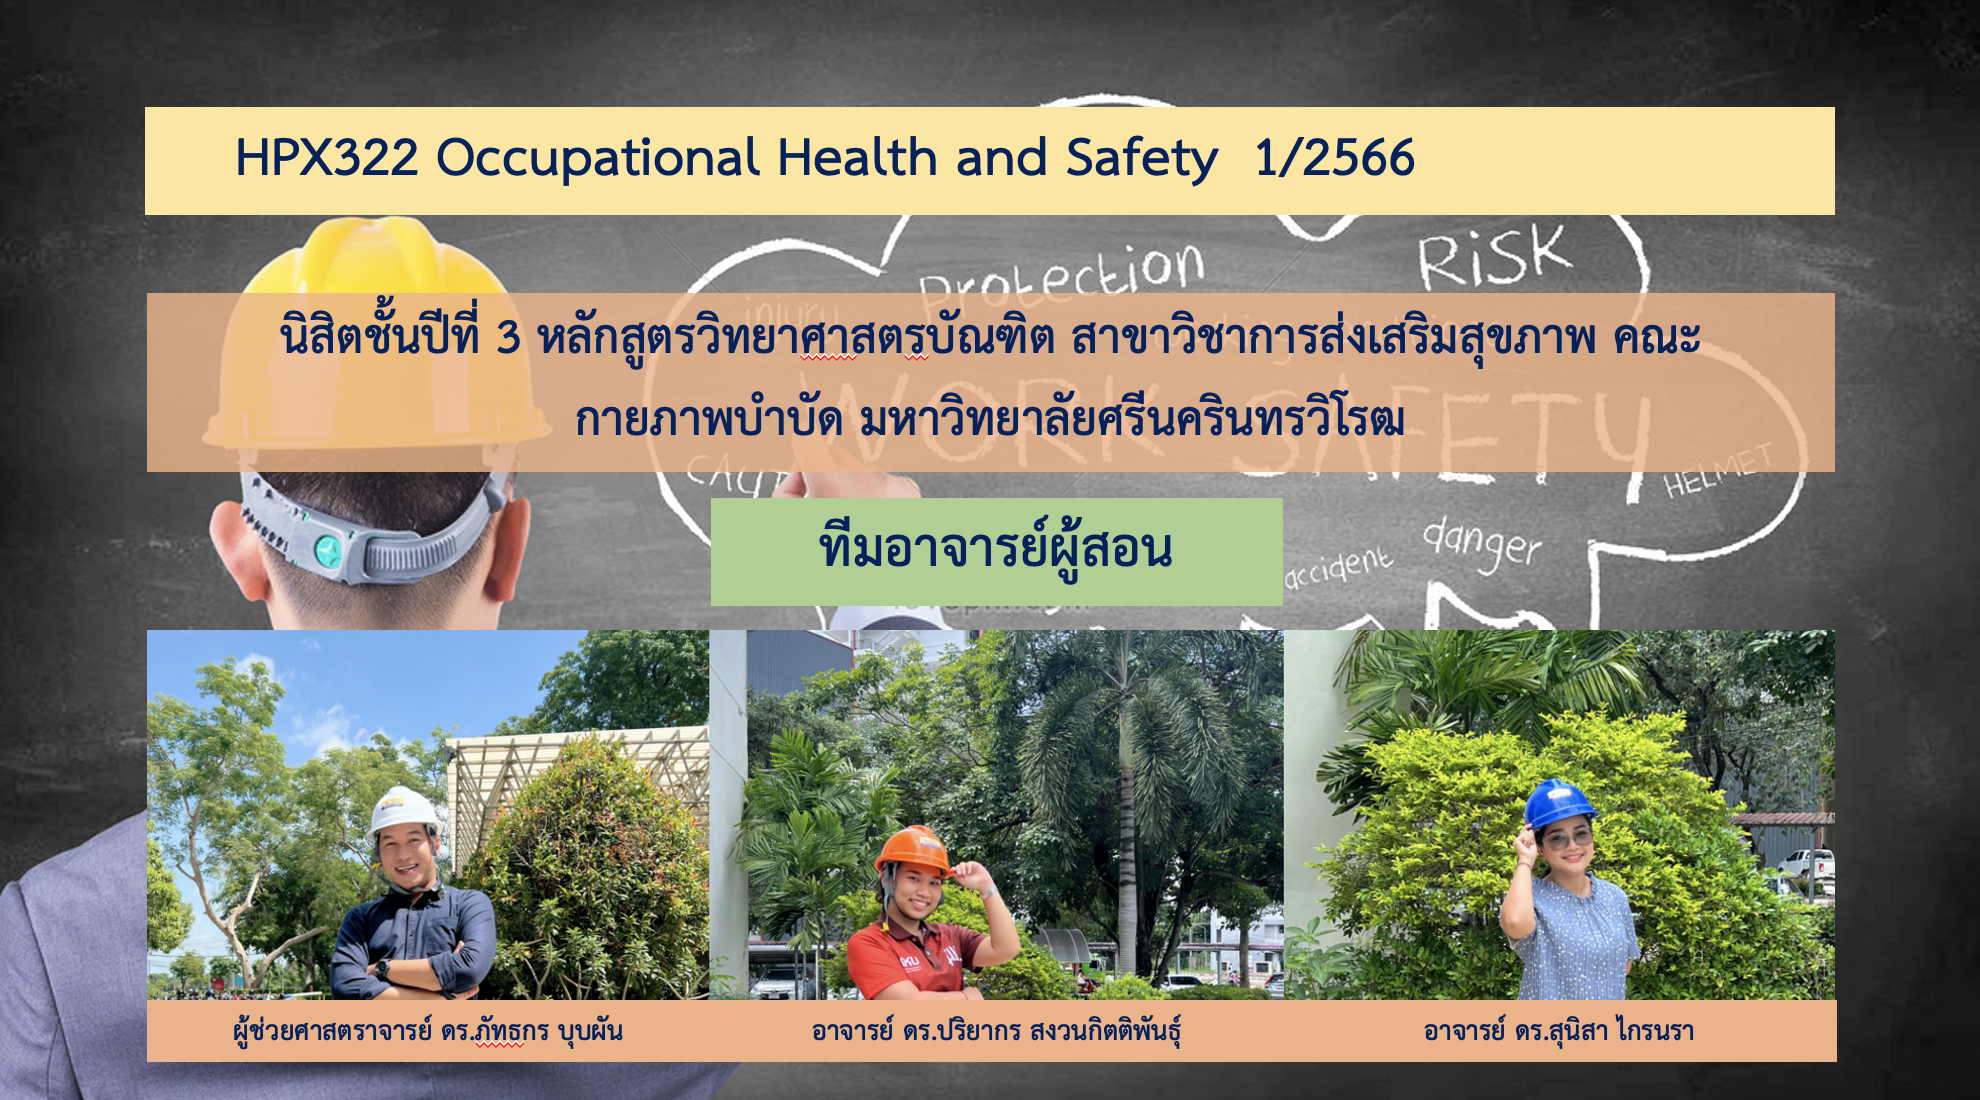 HPX322 Occupational Health and Safety 1/2566